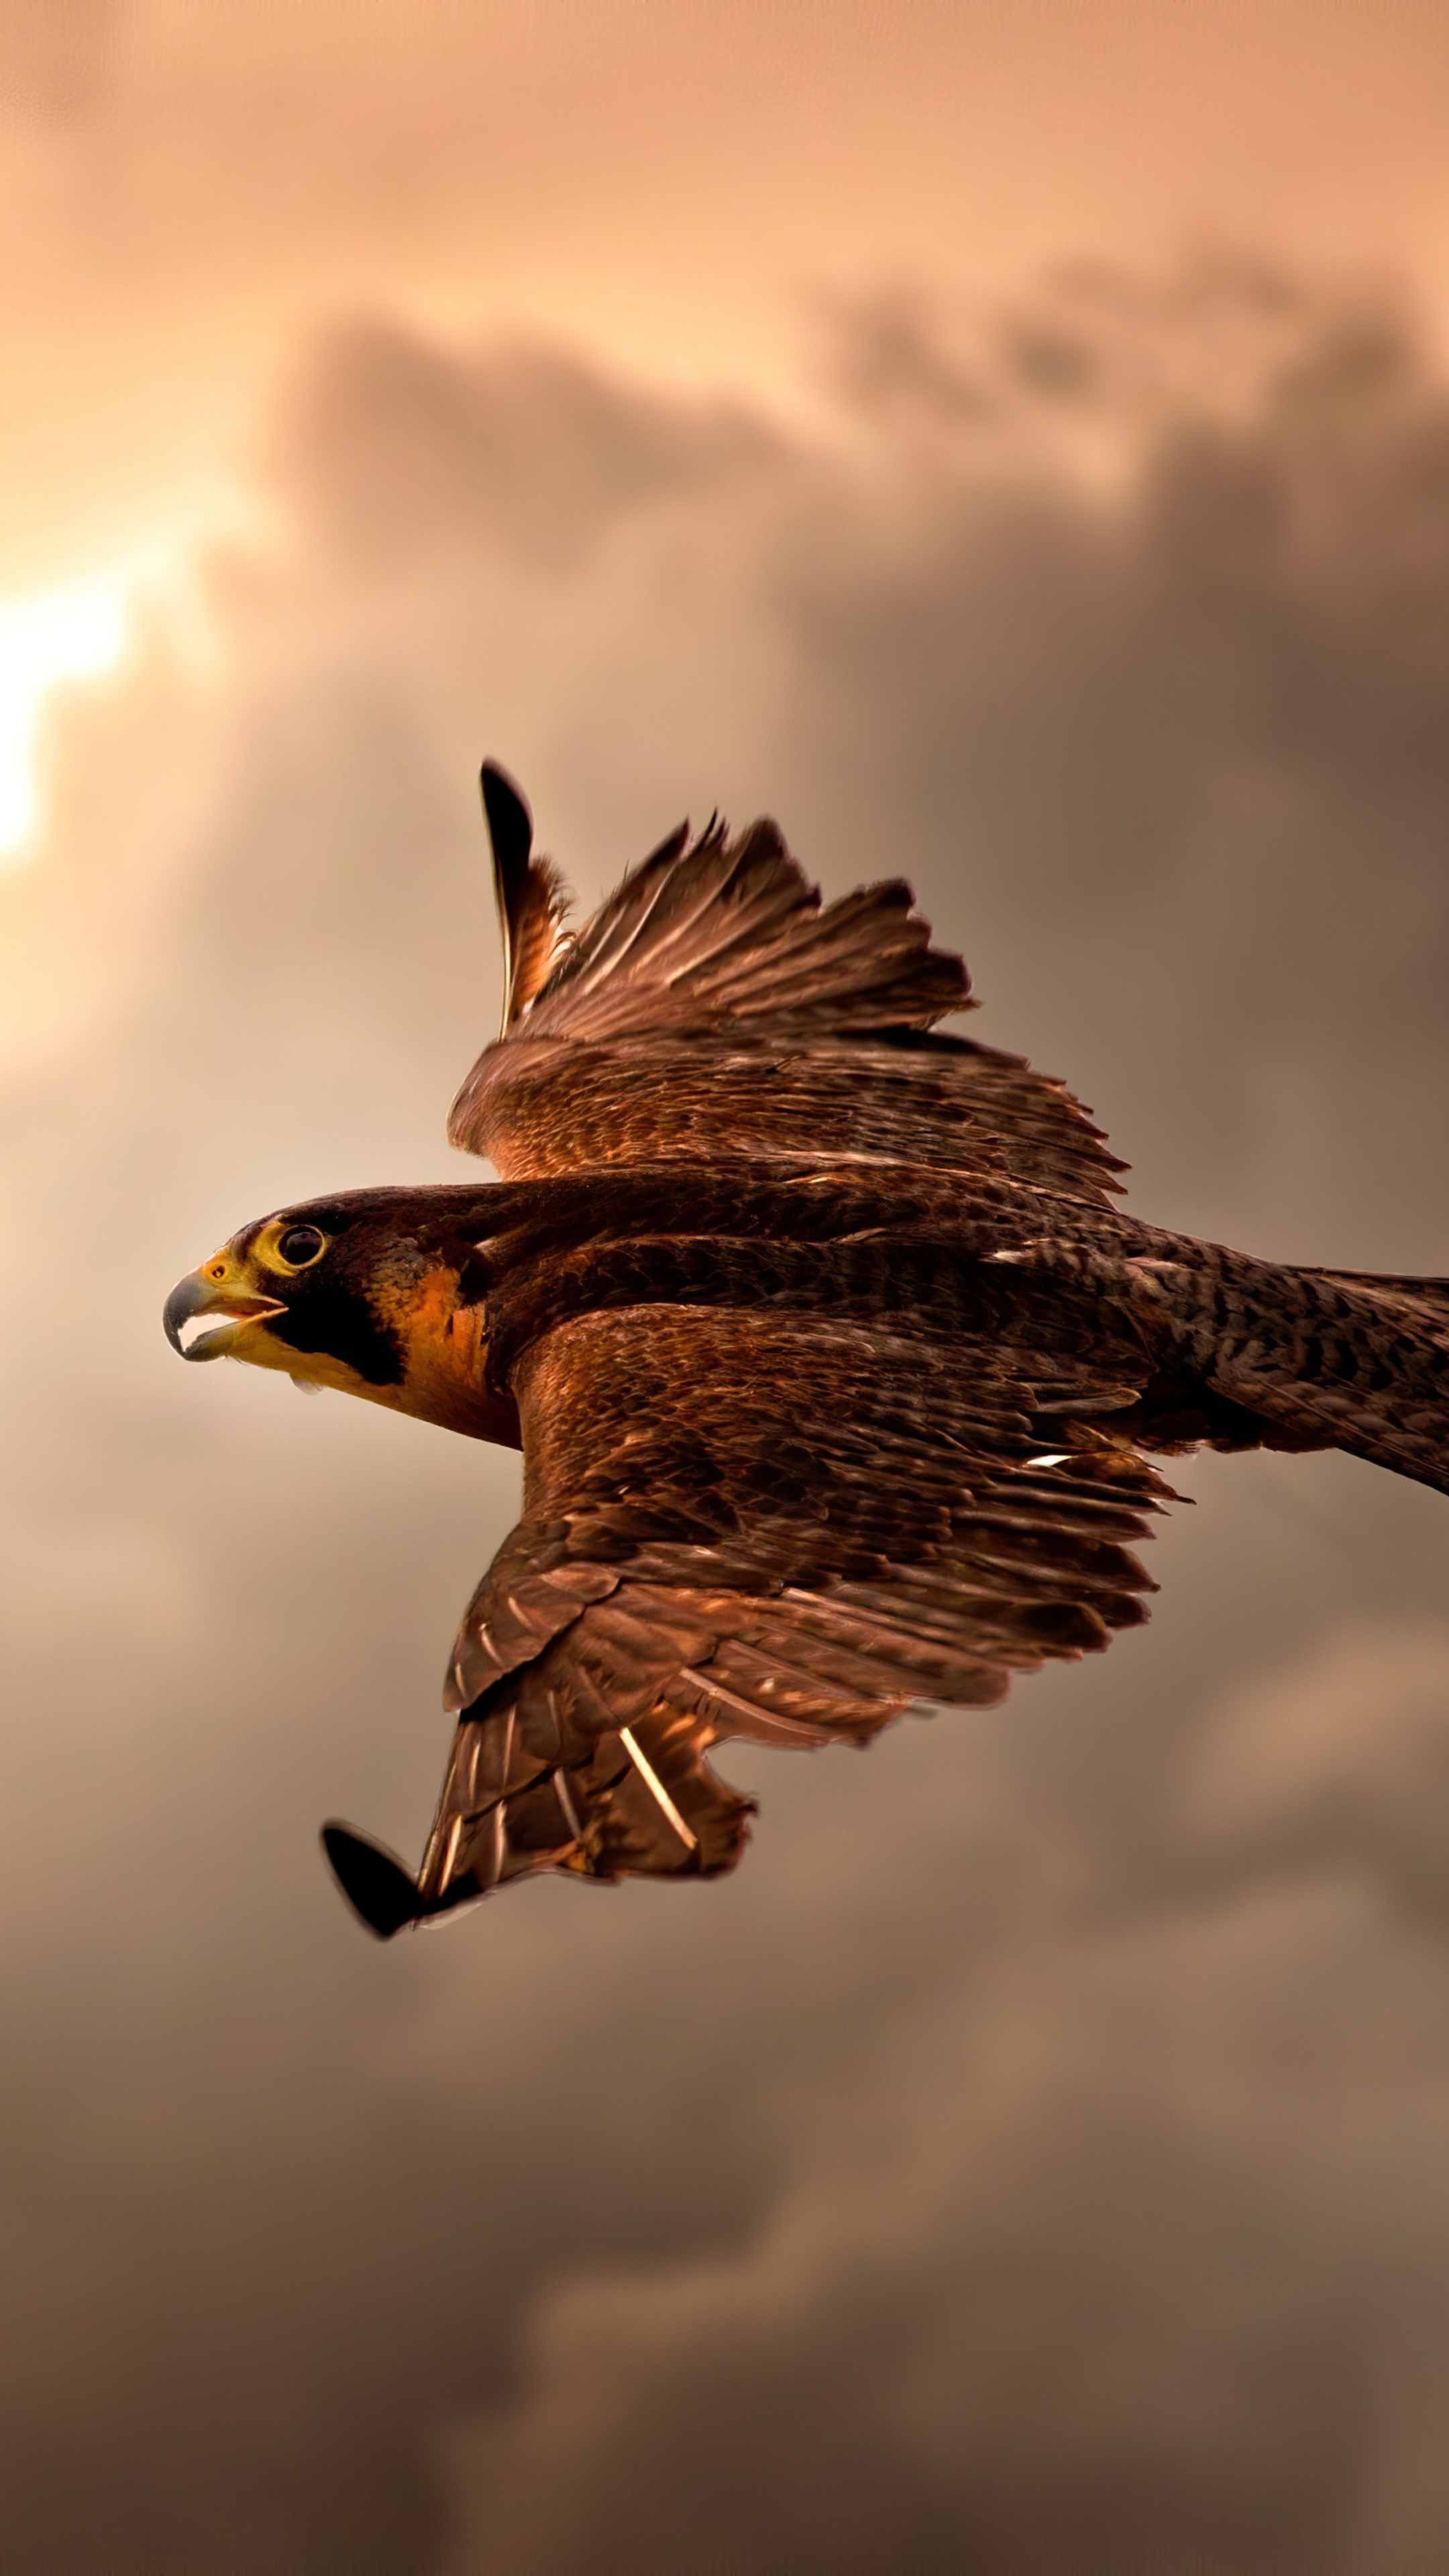 Hawk Flying In Sky 4k Sony Xperia X, XZ, Z5 Premium HD 4k Wallpaper, Image, Background, Photo and Picture